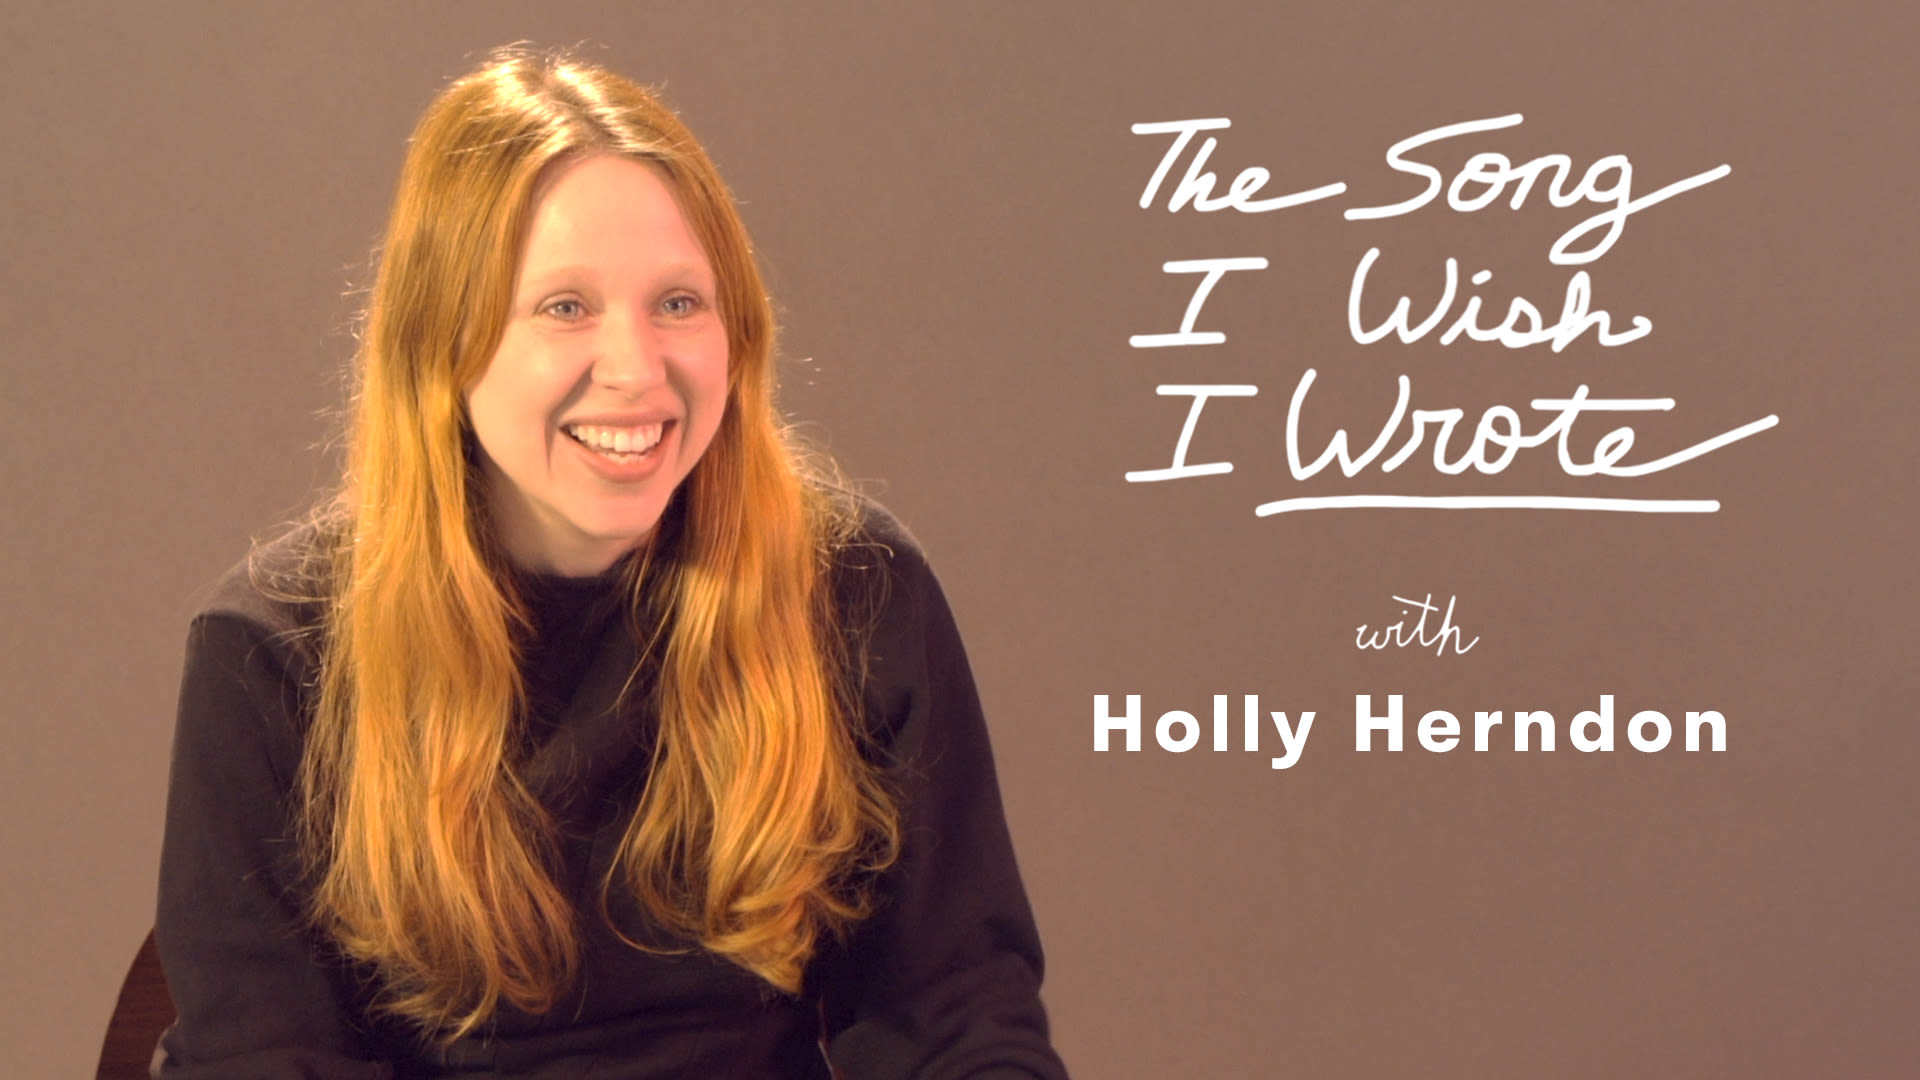 Wrote this song. Holly Herndon Band. She Wishes.